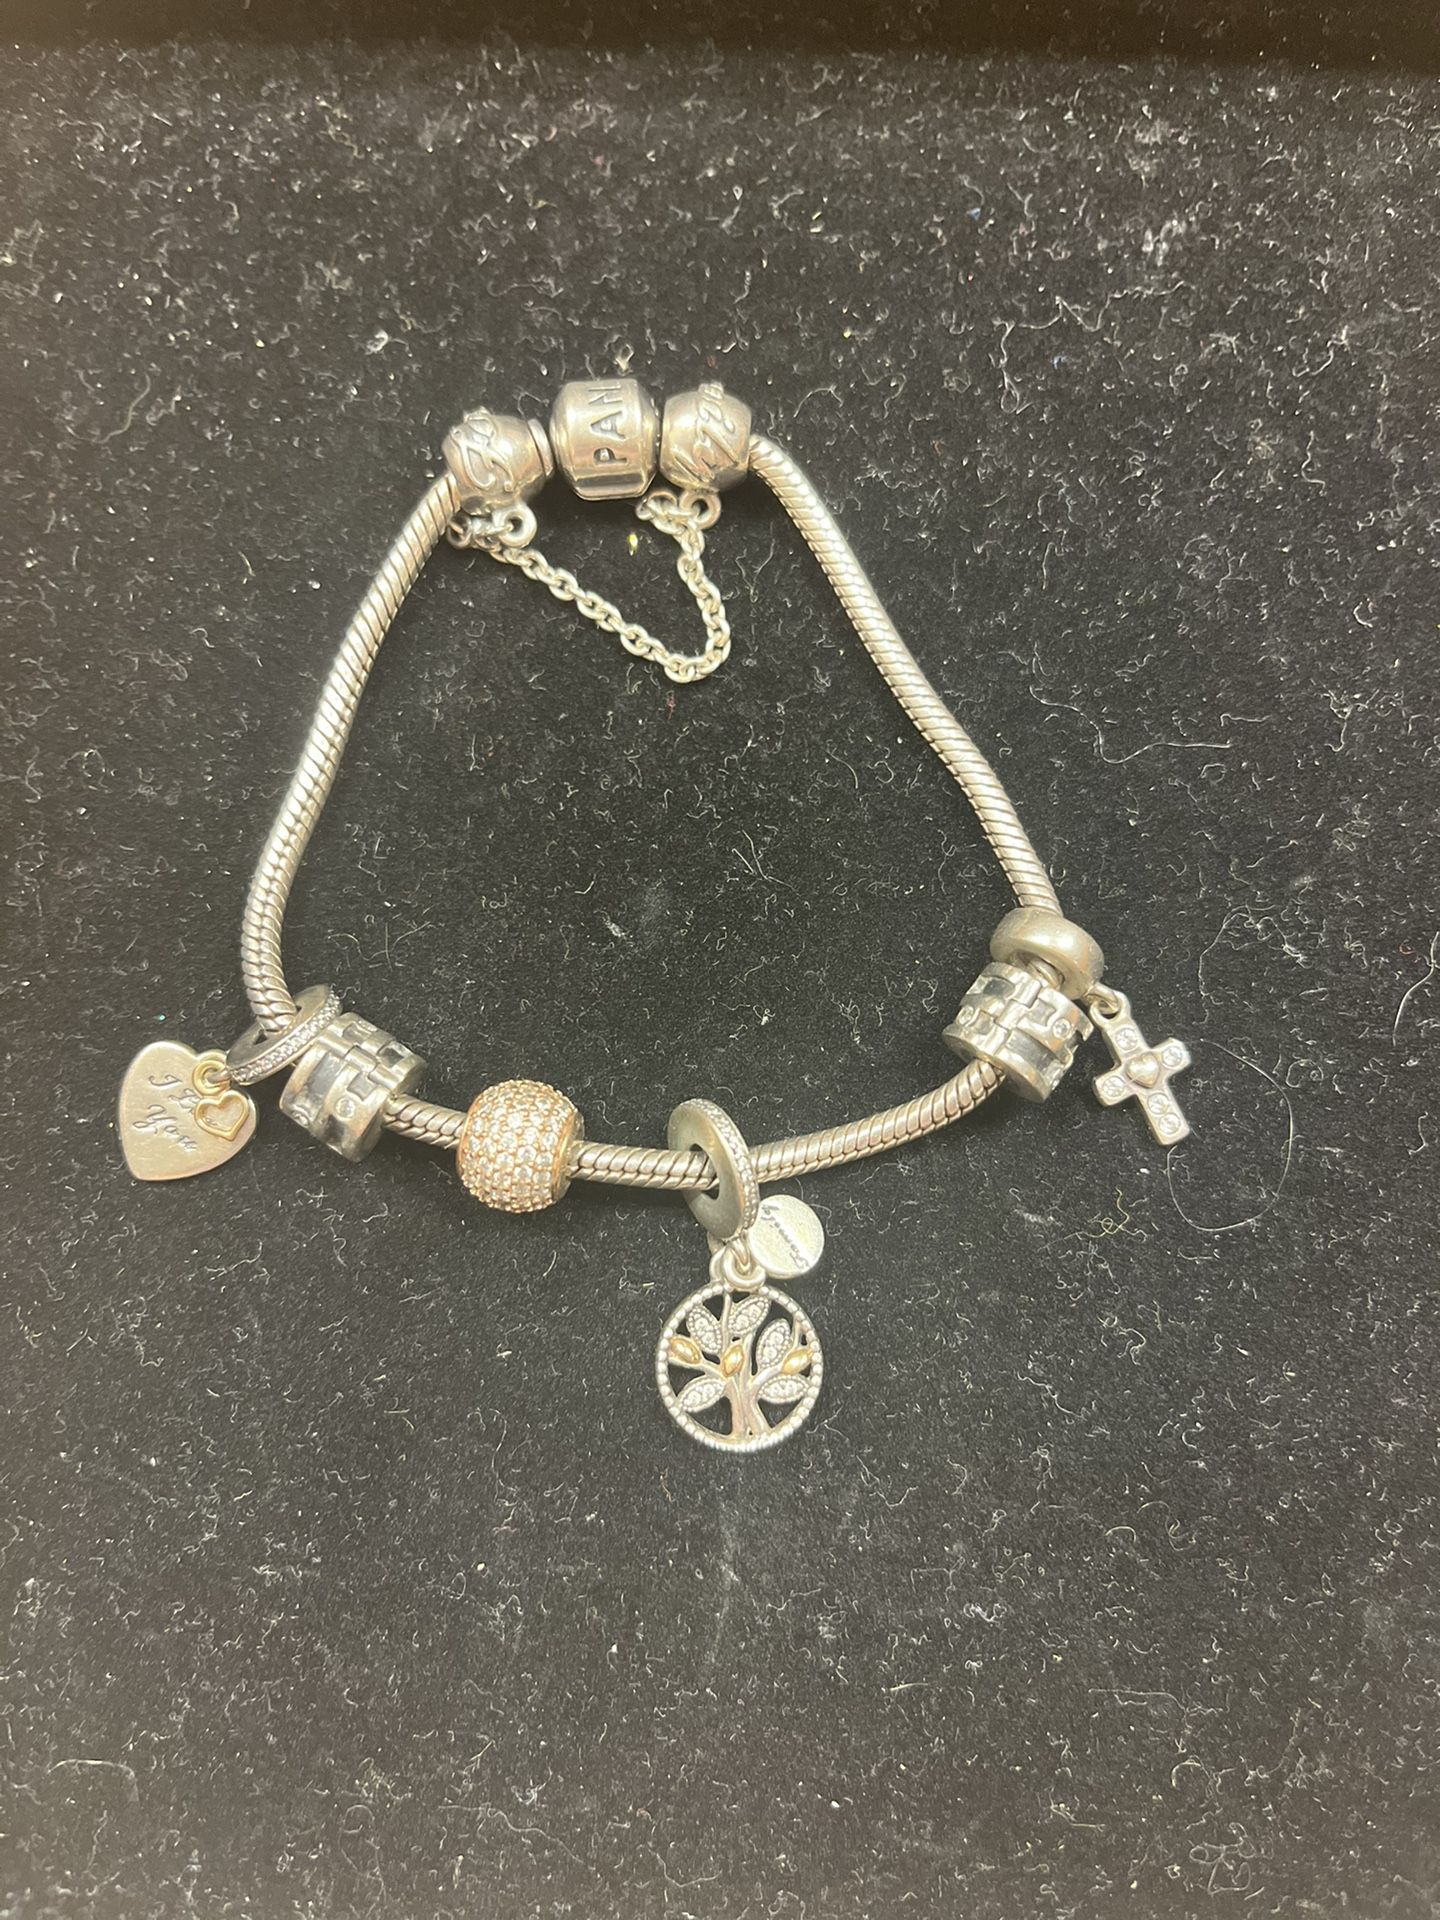 Pandora Bracelet With Safety Chain And Charms